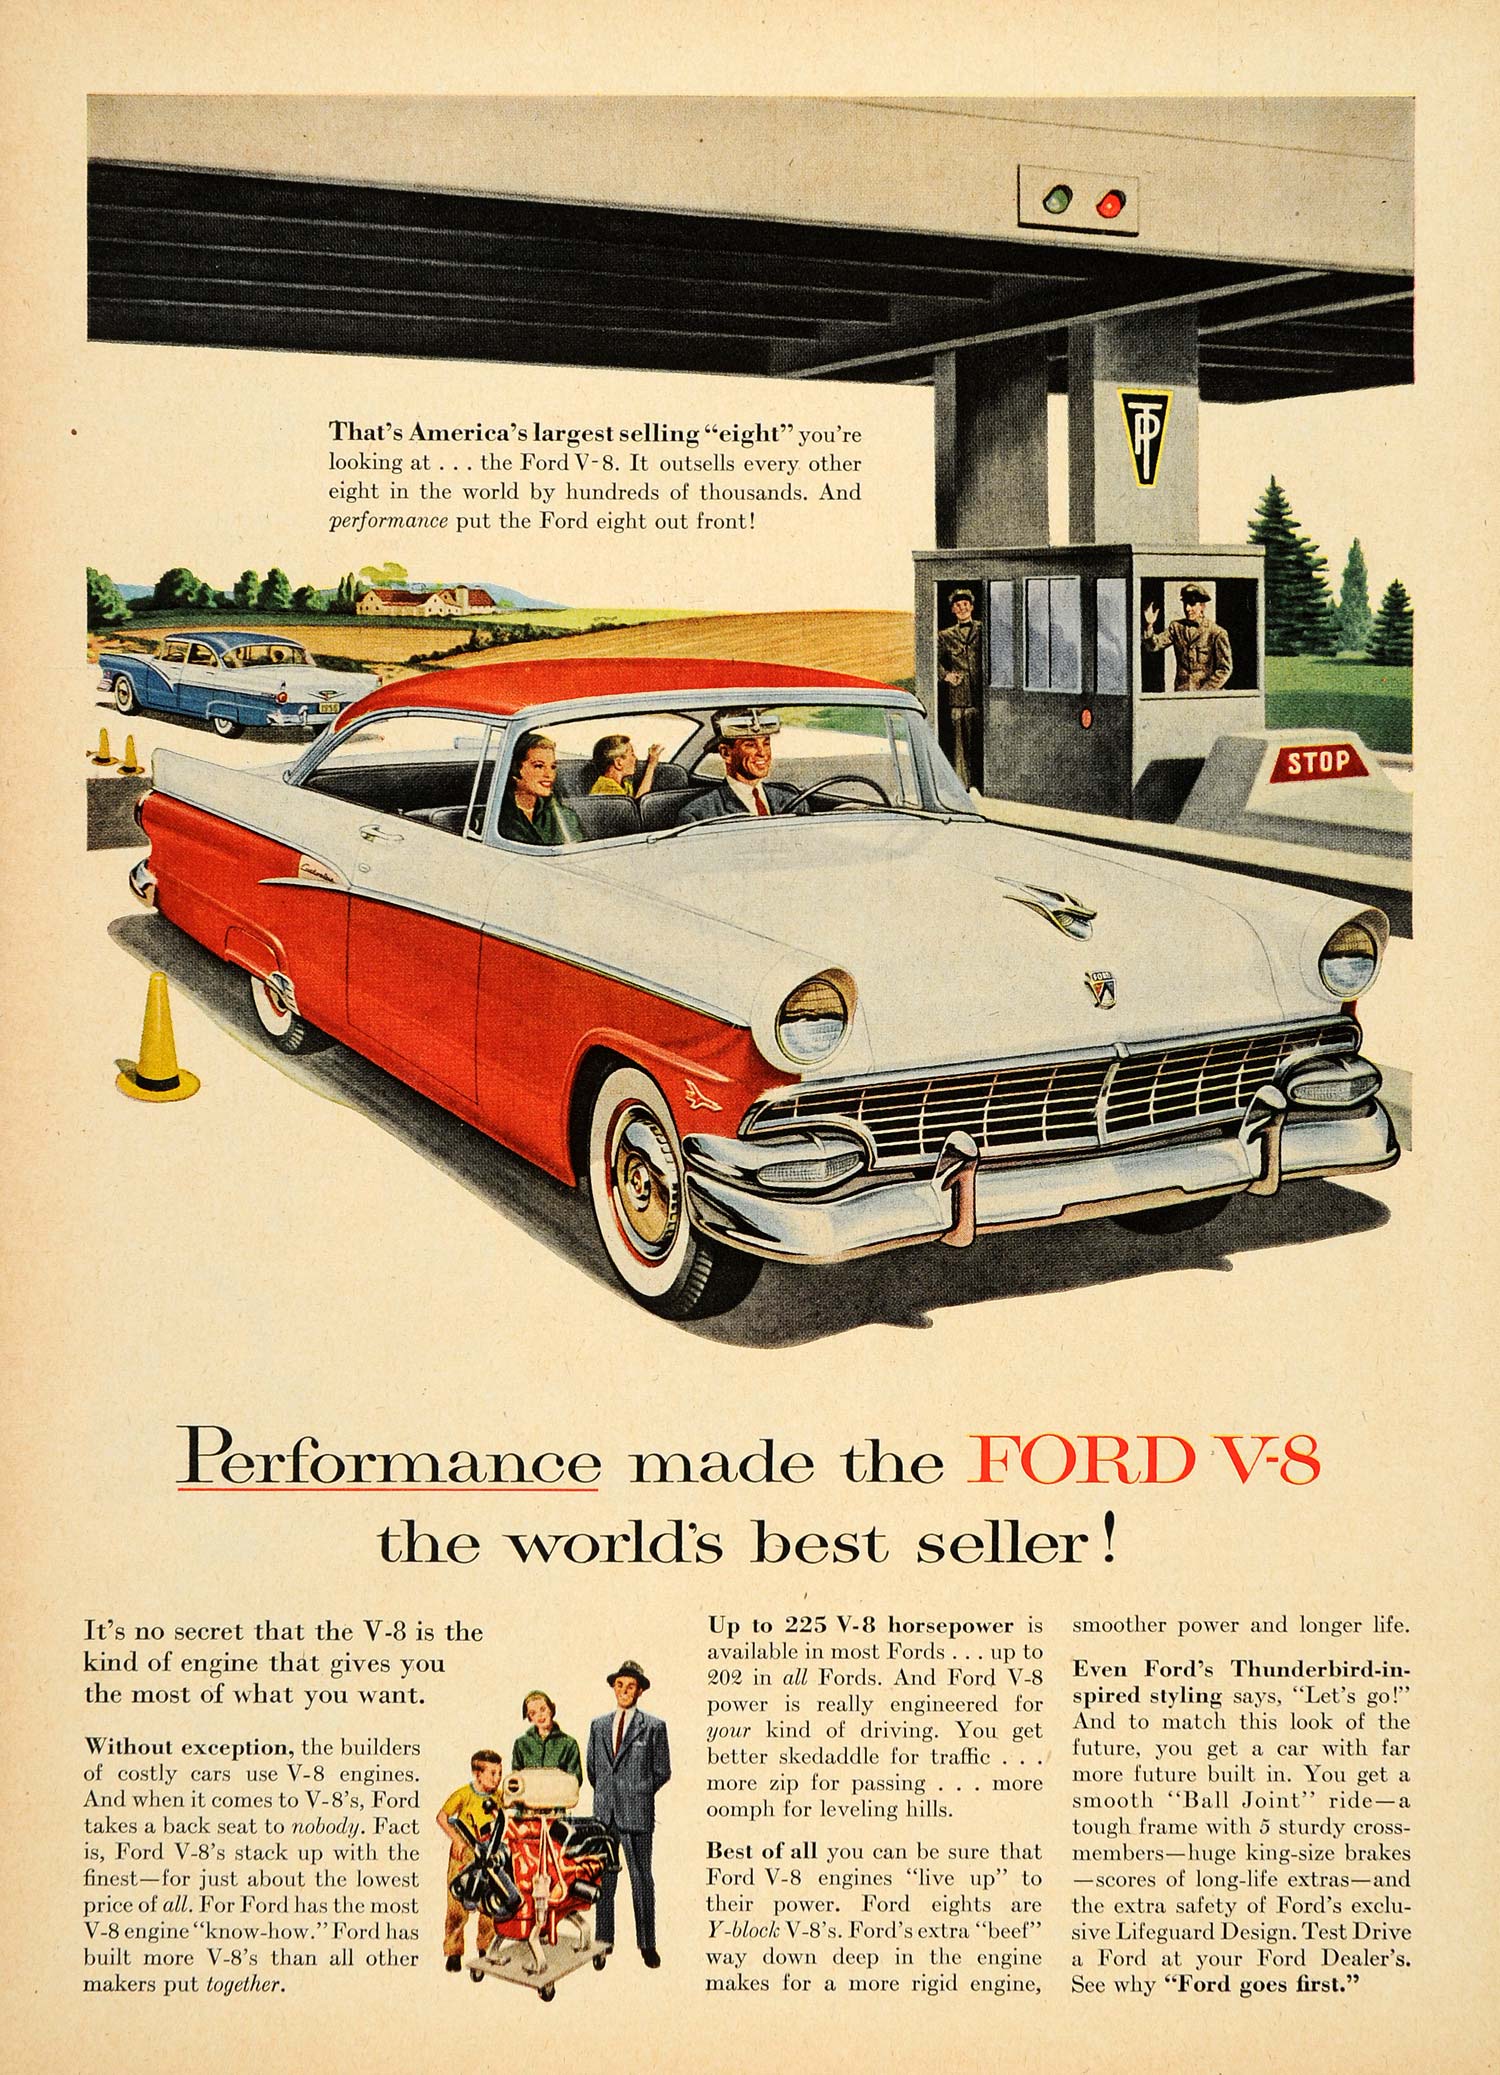 1956 Ad Toll Way Ford Eight V8 Engine King Size Brakes - ORIGINAL TM3